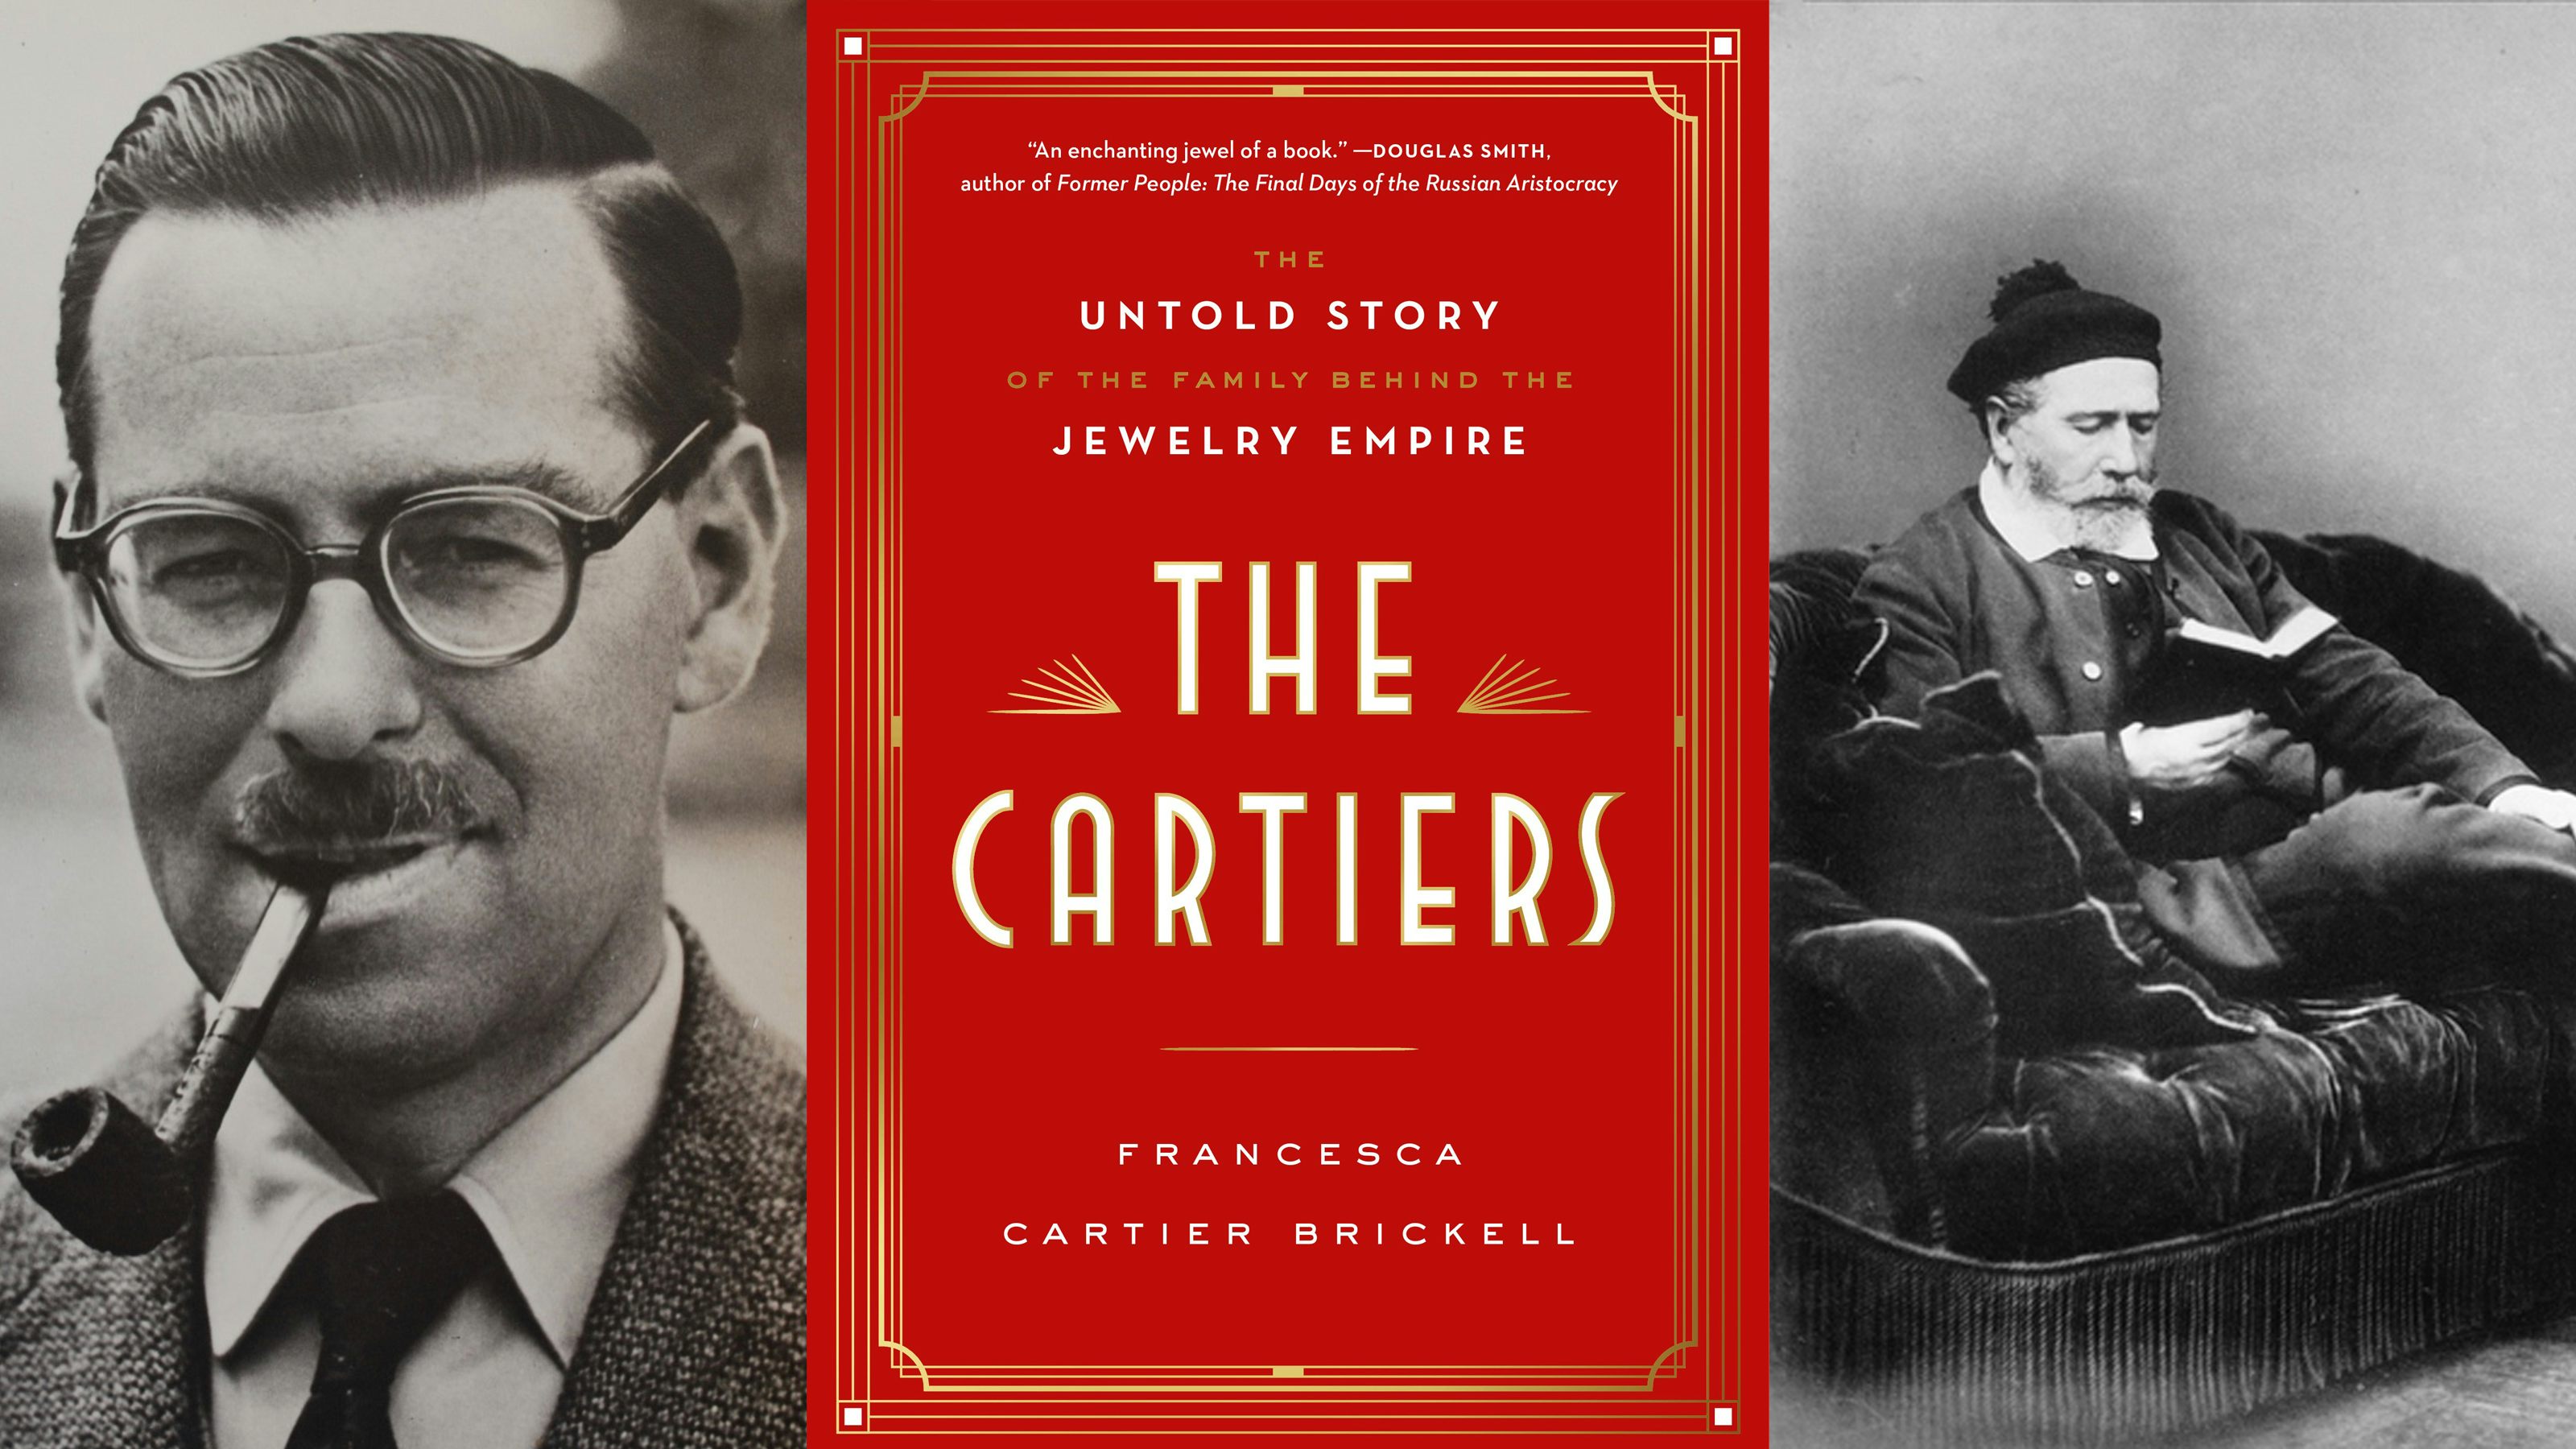 Louis Cartier - The Story of a Brilliant Jewelry Designer